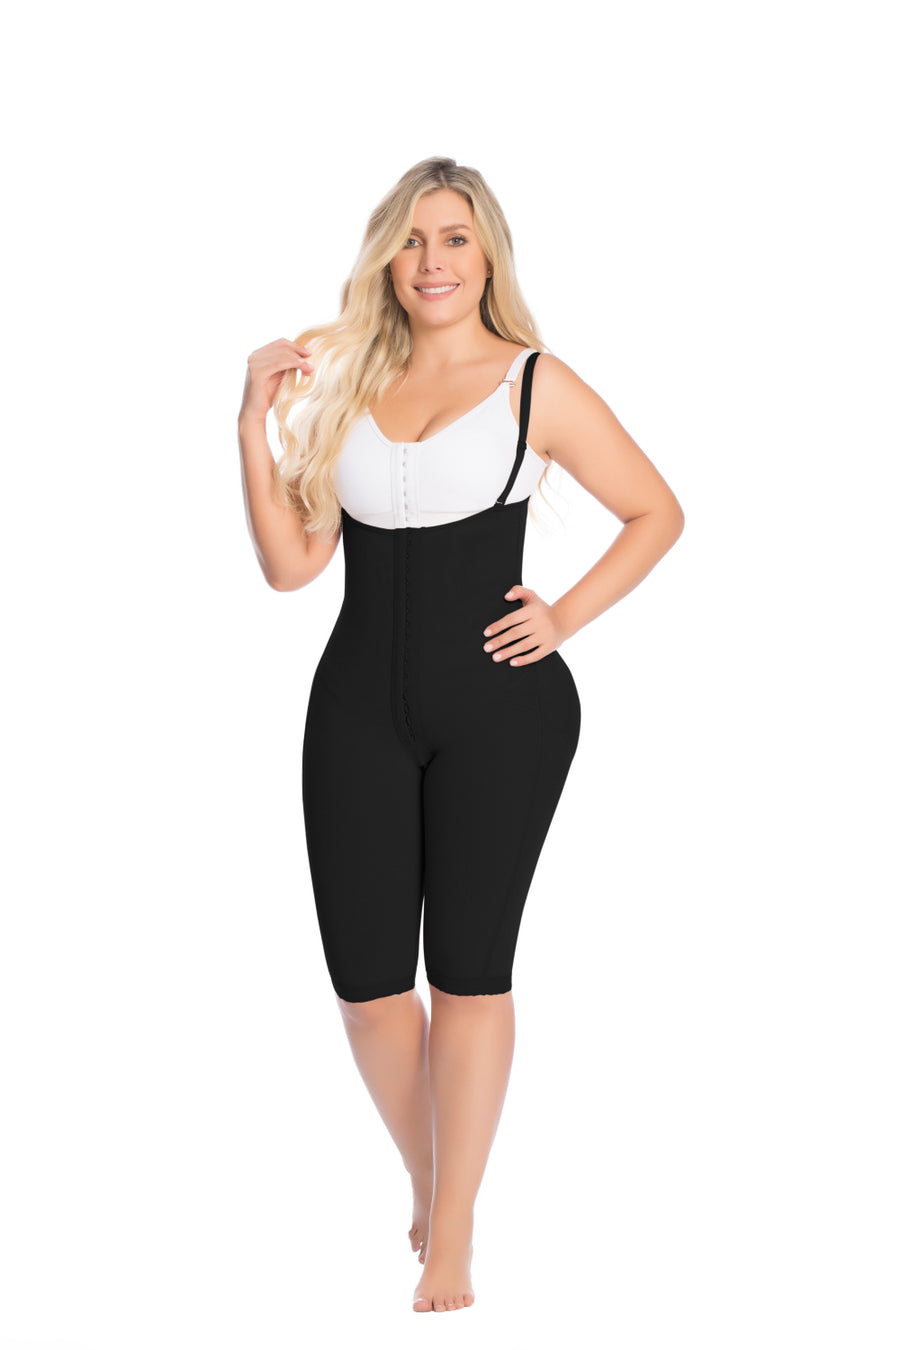 we specialize on Colombian bodyshapers available at the shopping mall